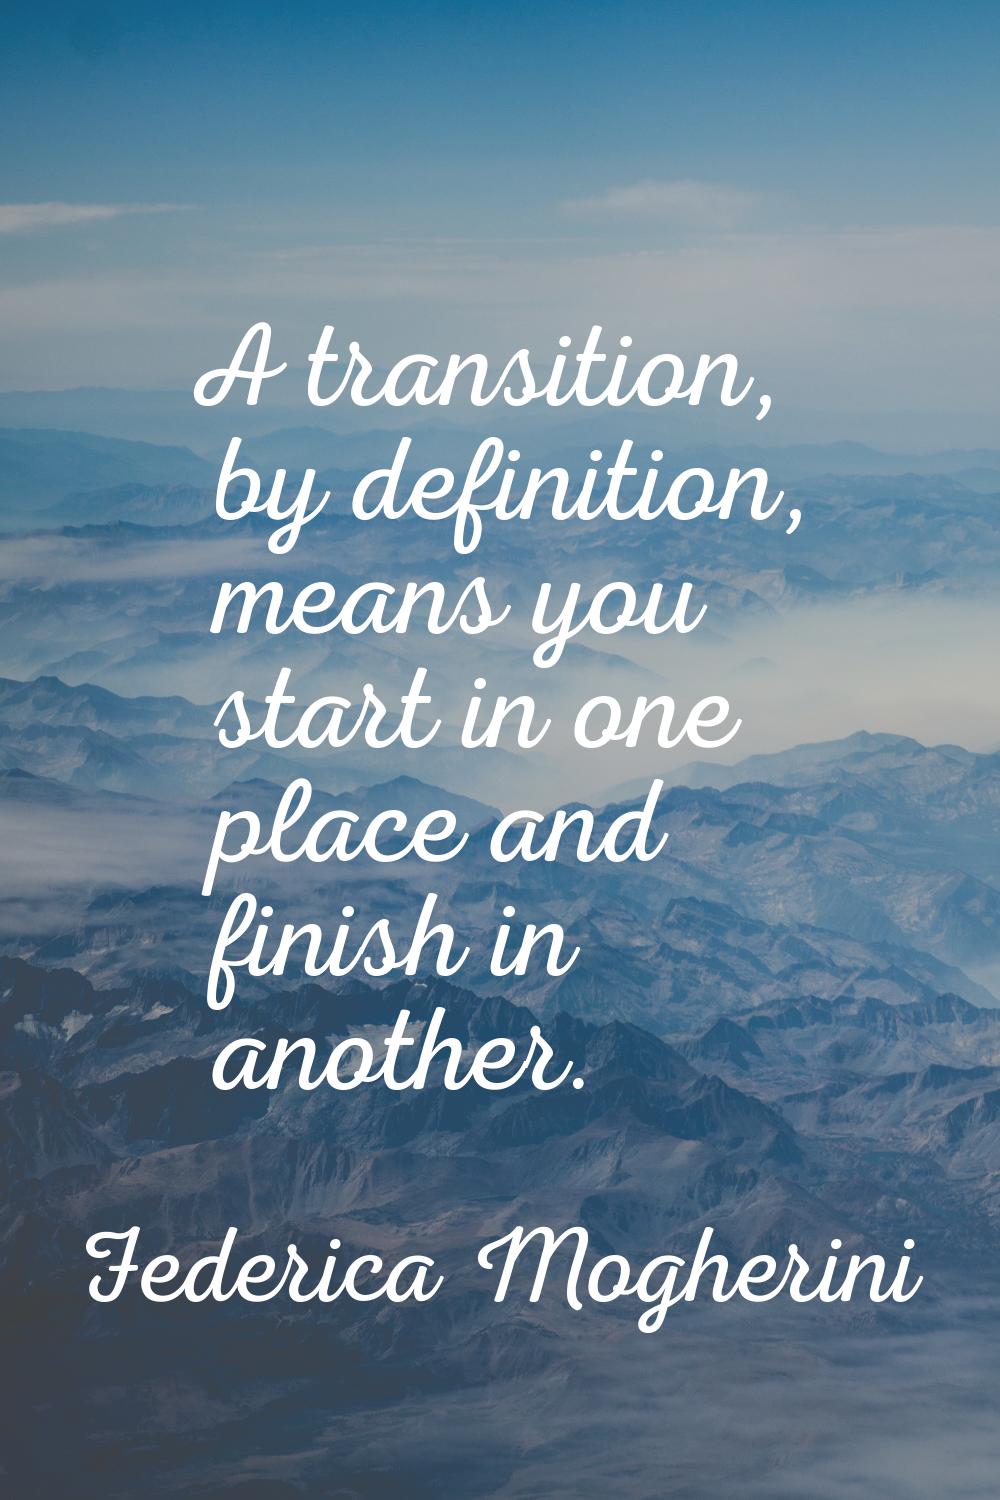 A transition, by definition, means you start in one place and finish in another.